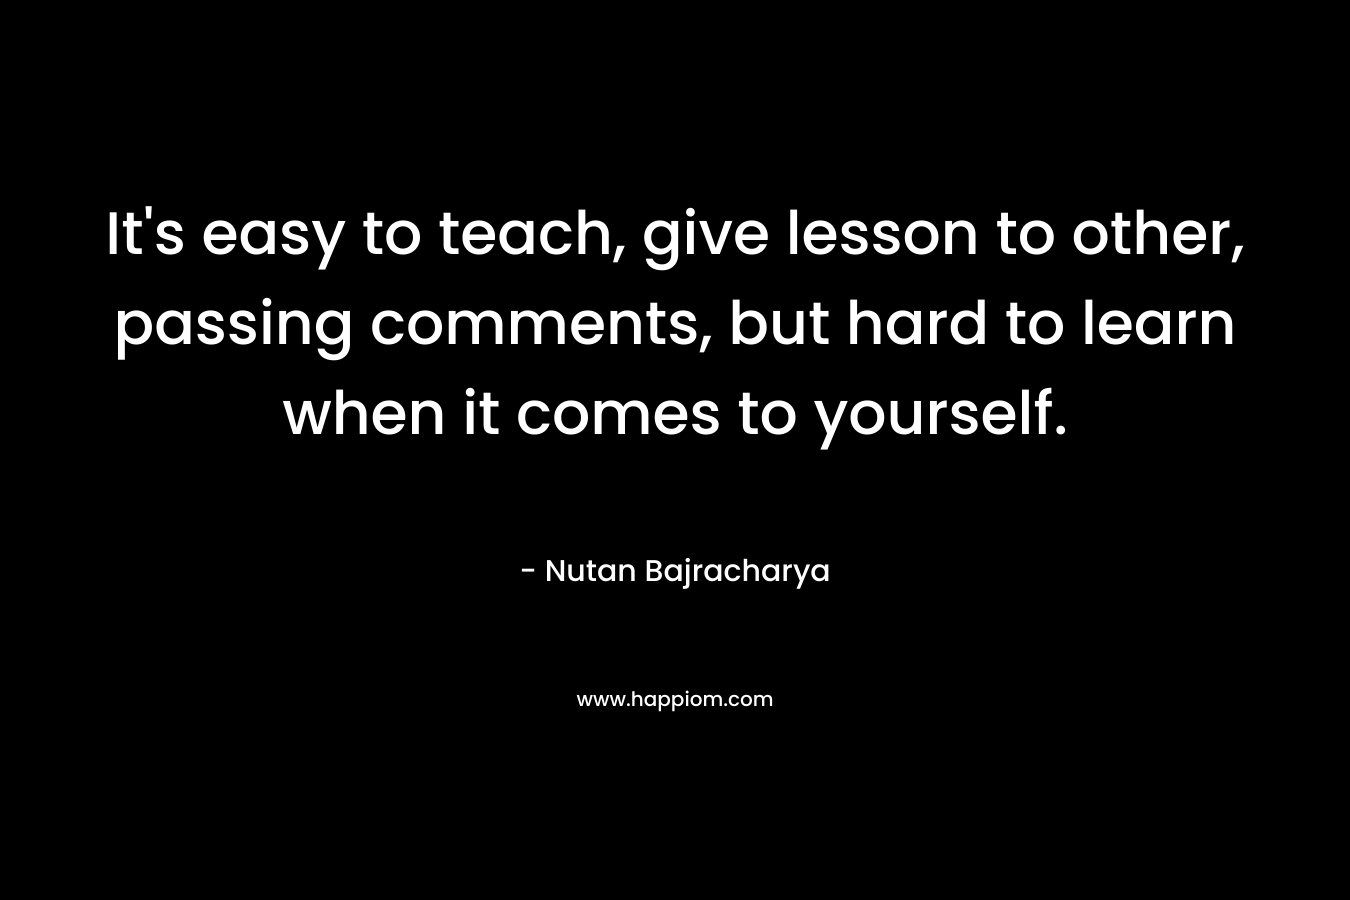 It's easy to teach, give lesson to other, passing comments, but hard to learn when it comes to yourself.